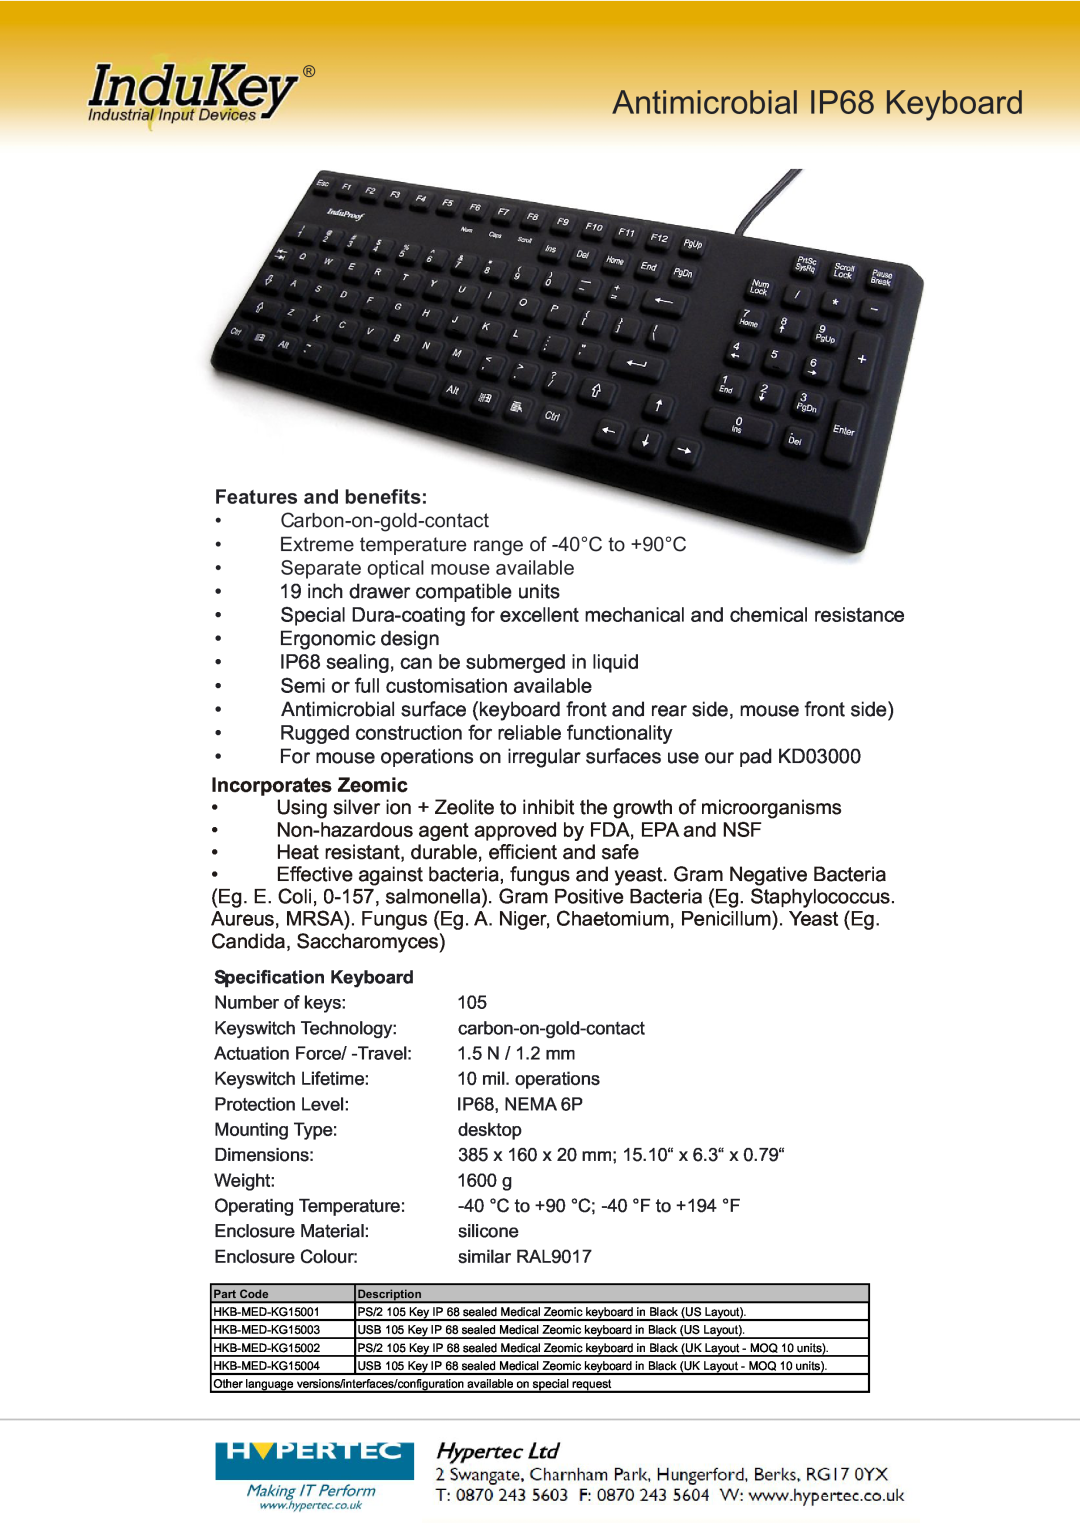 Hypertec dimensions Antimicrobial IP68 Keyboard, Features and benefits, Semi or full customisation available 